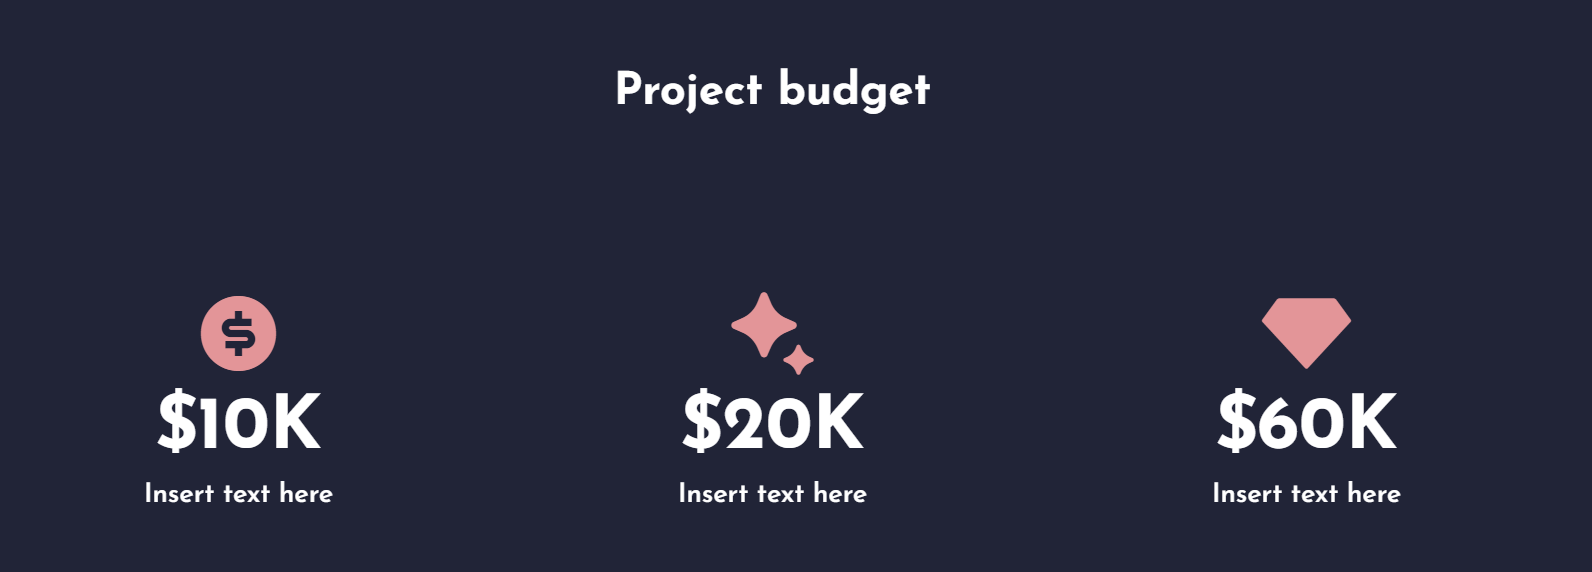 Project proposal project budget example